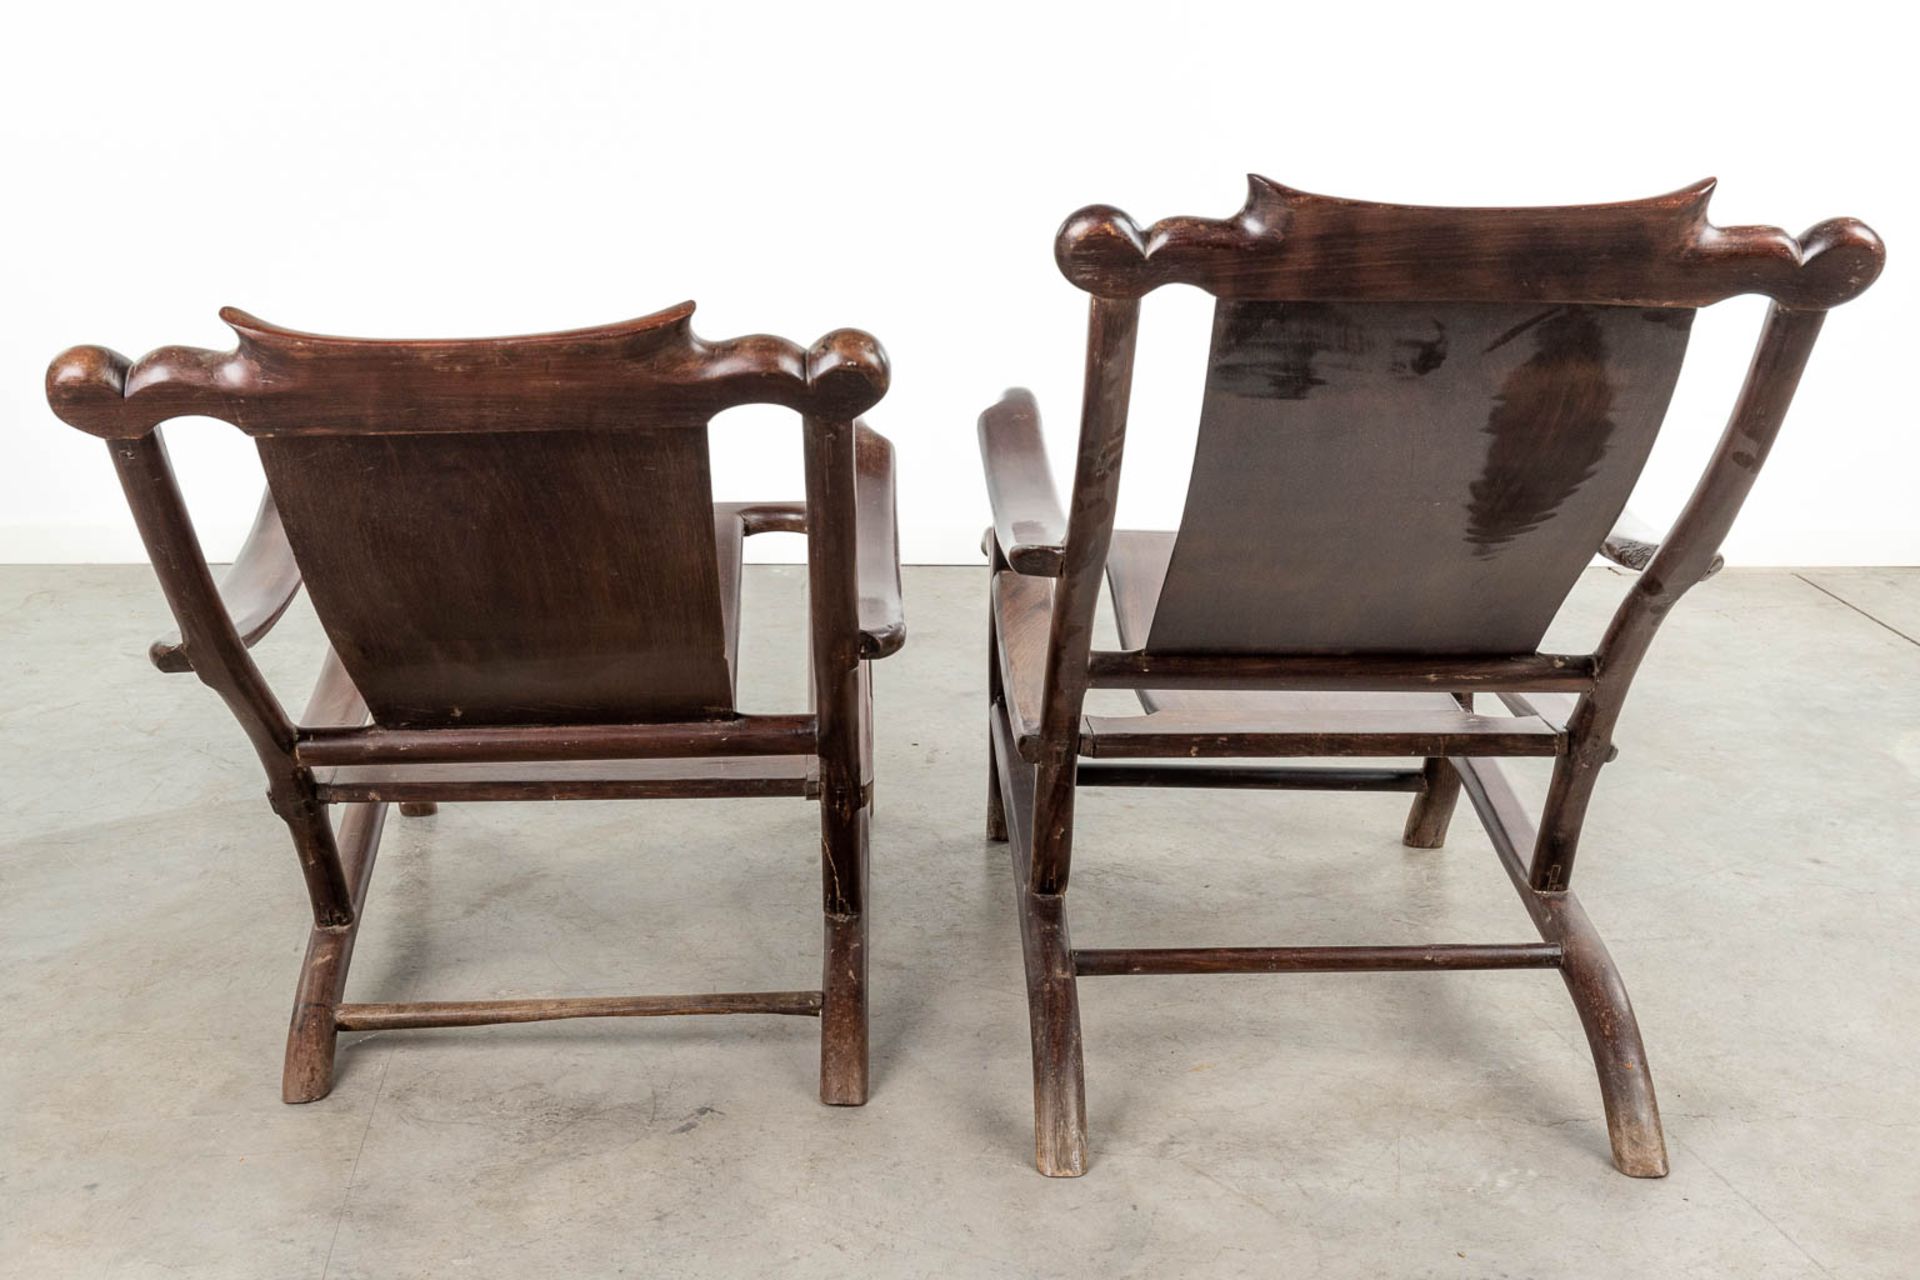 A pair of Chinese hardwood armchairs. (L: 100 x W: 57 x H: 78 cm) - Image 5 of 8